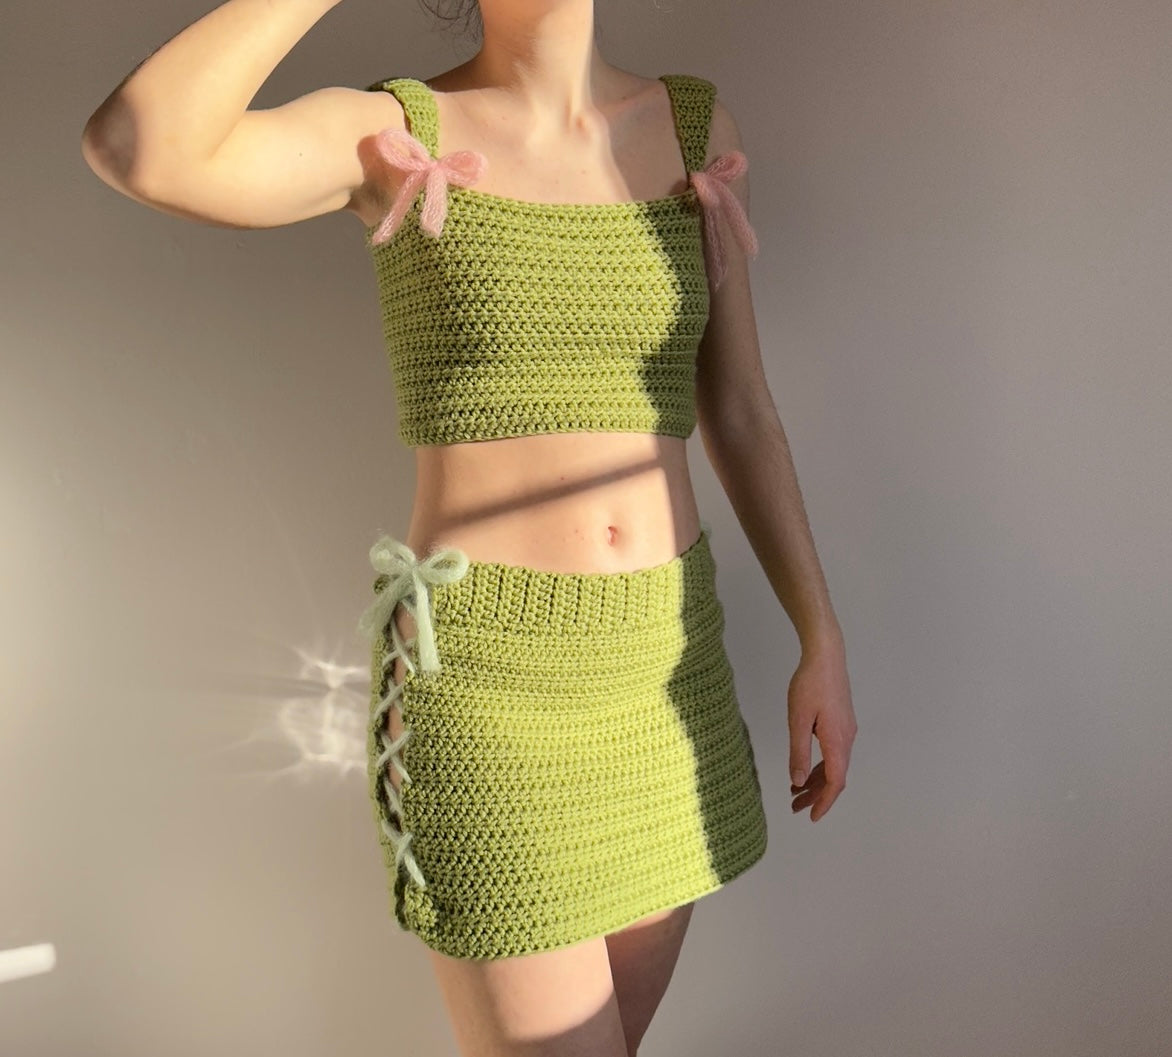 Handmade crochet coord with bow top and lace up skirt